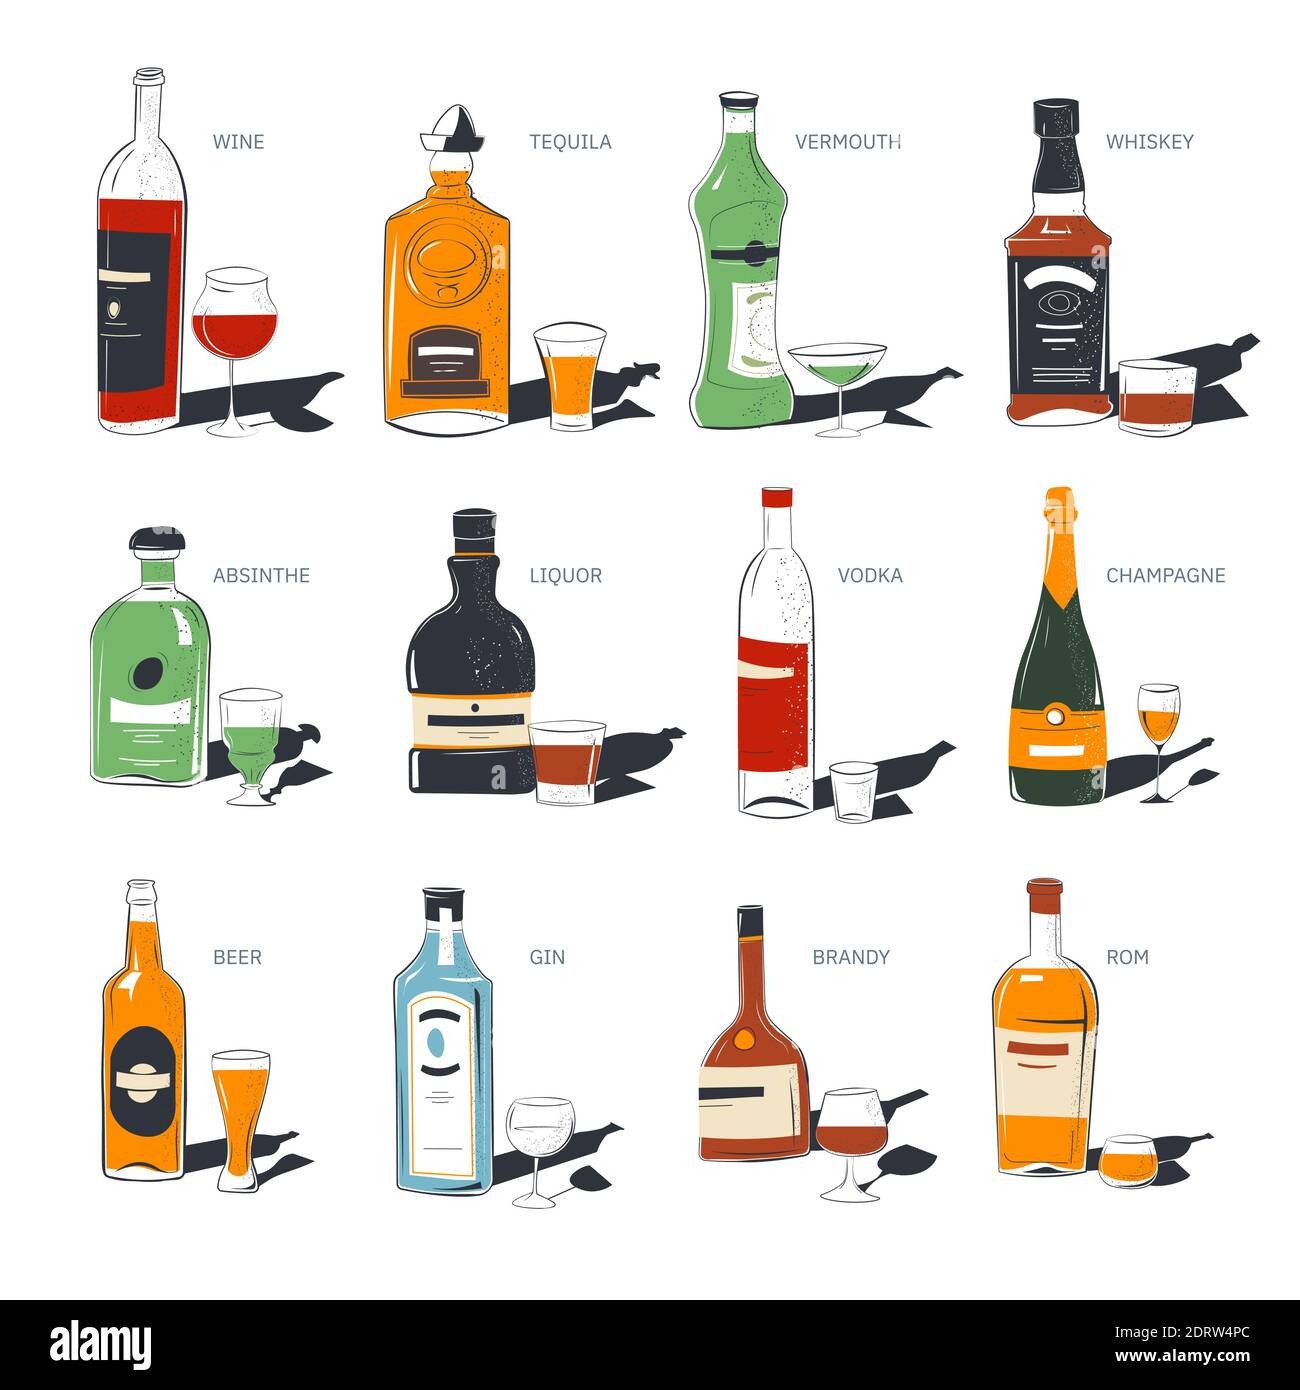 Alcoholic beverages, bottles and glasses shots Stock Vector